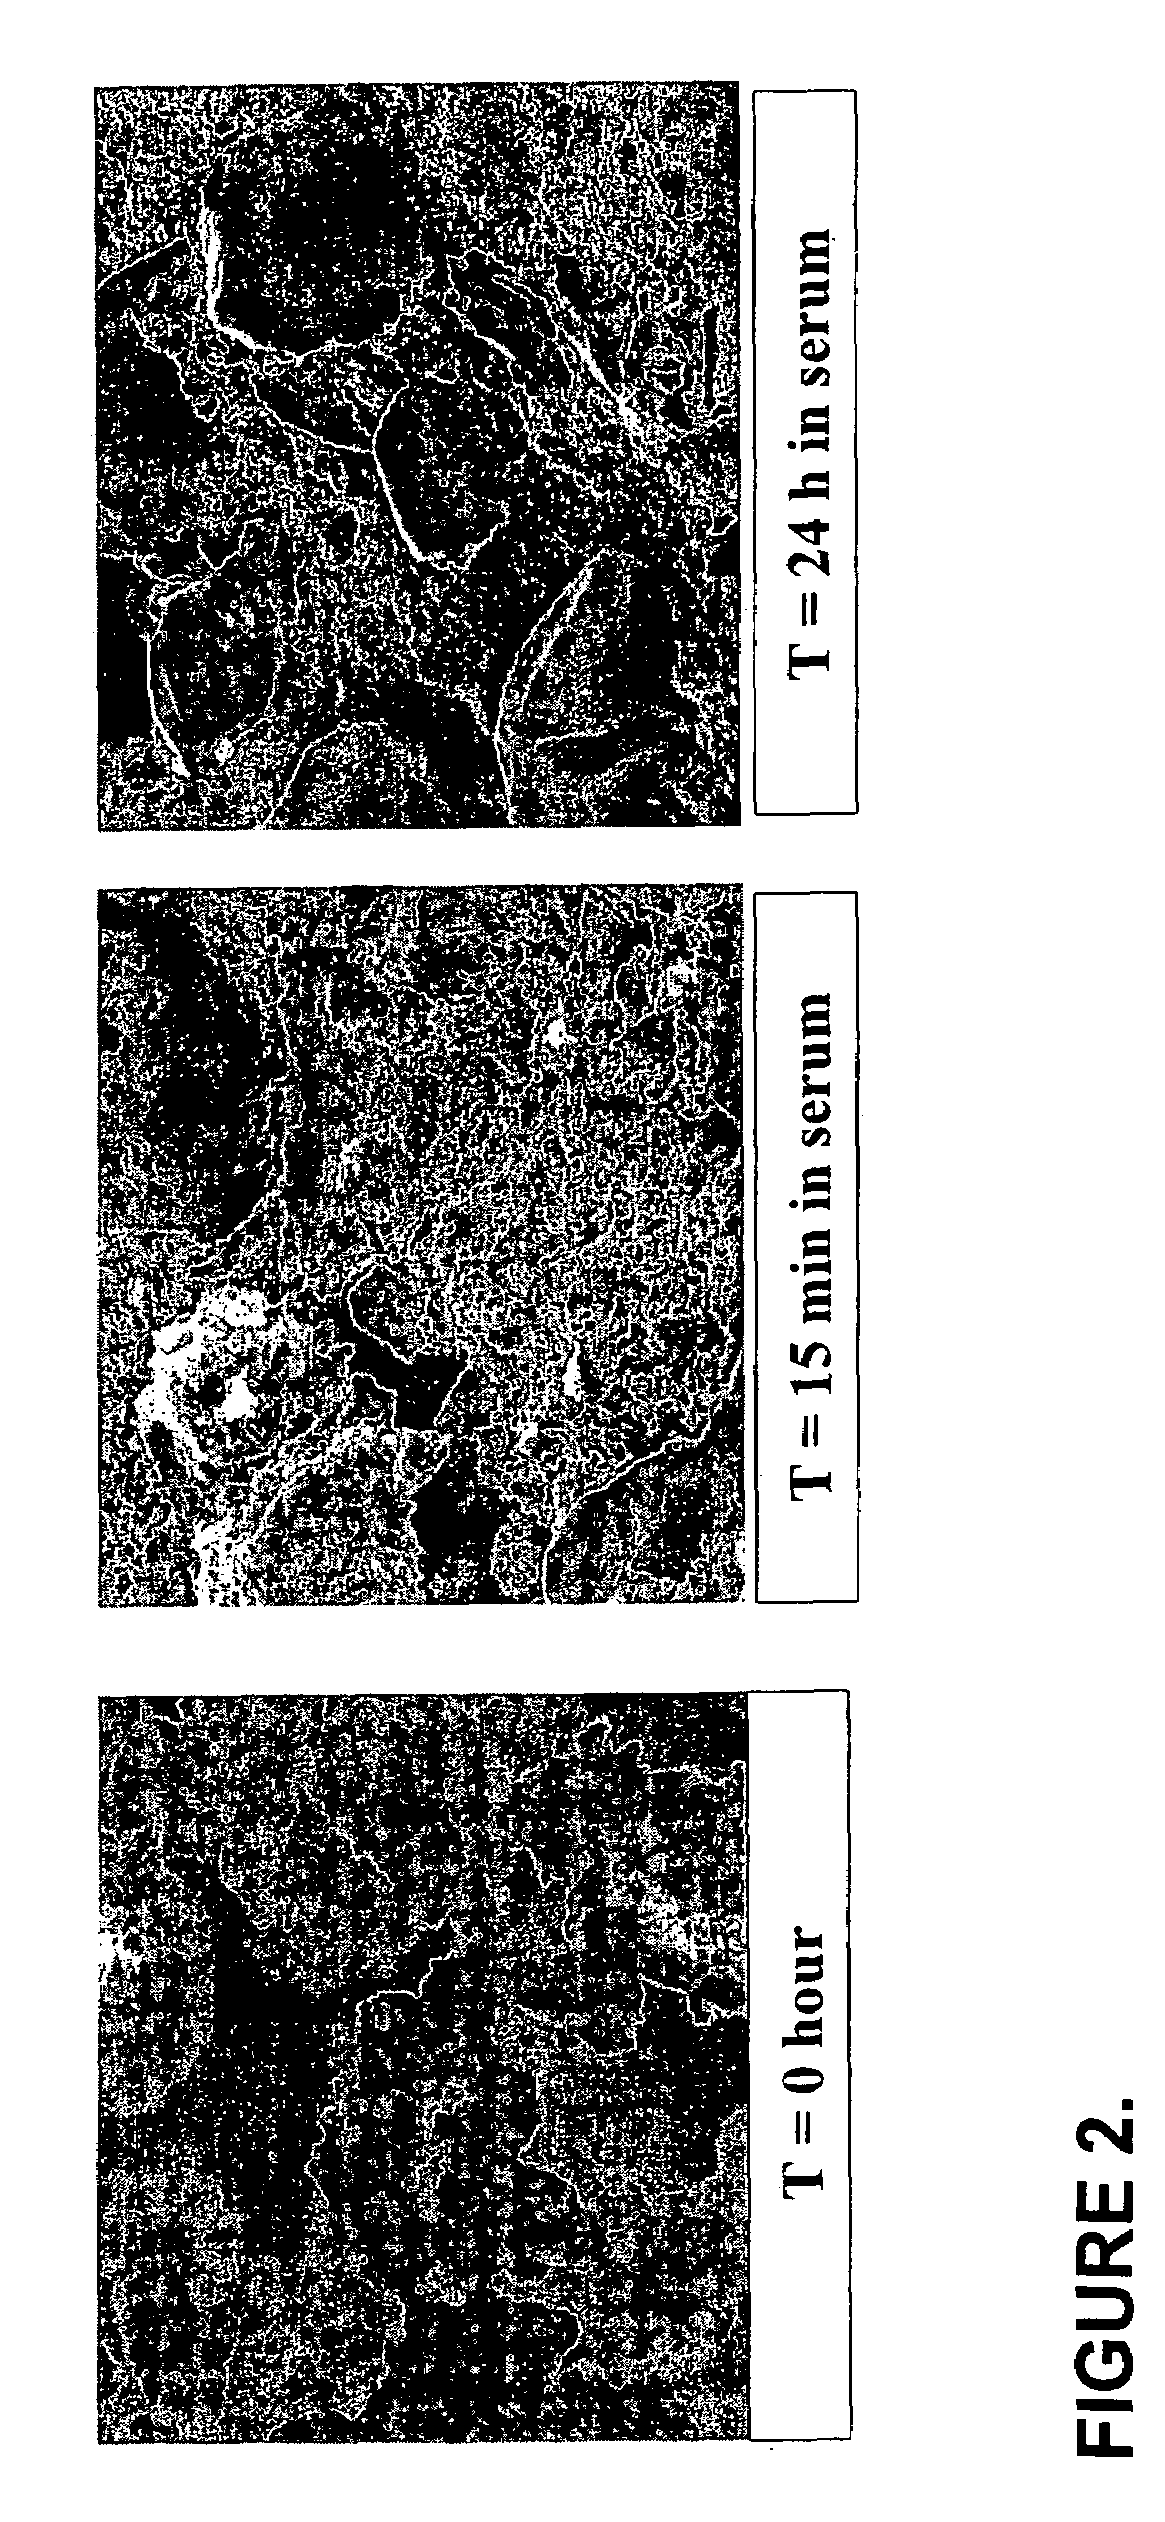 Biocompatible cement containing reactive calcium phosphate nanoparticles and methods for making and using cement